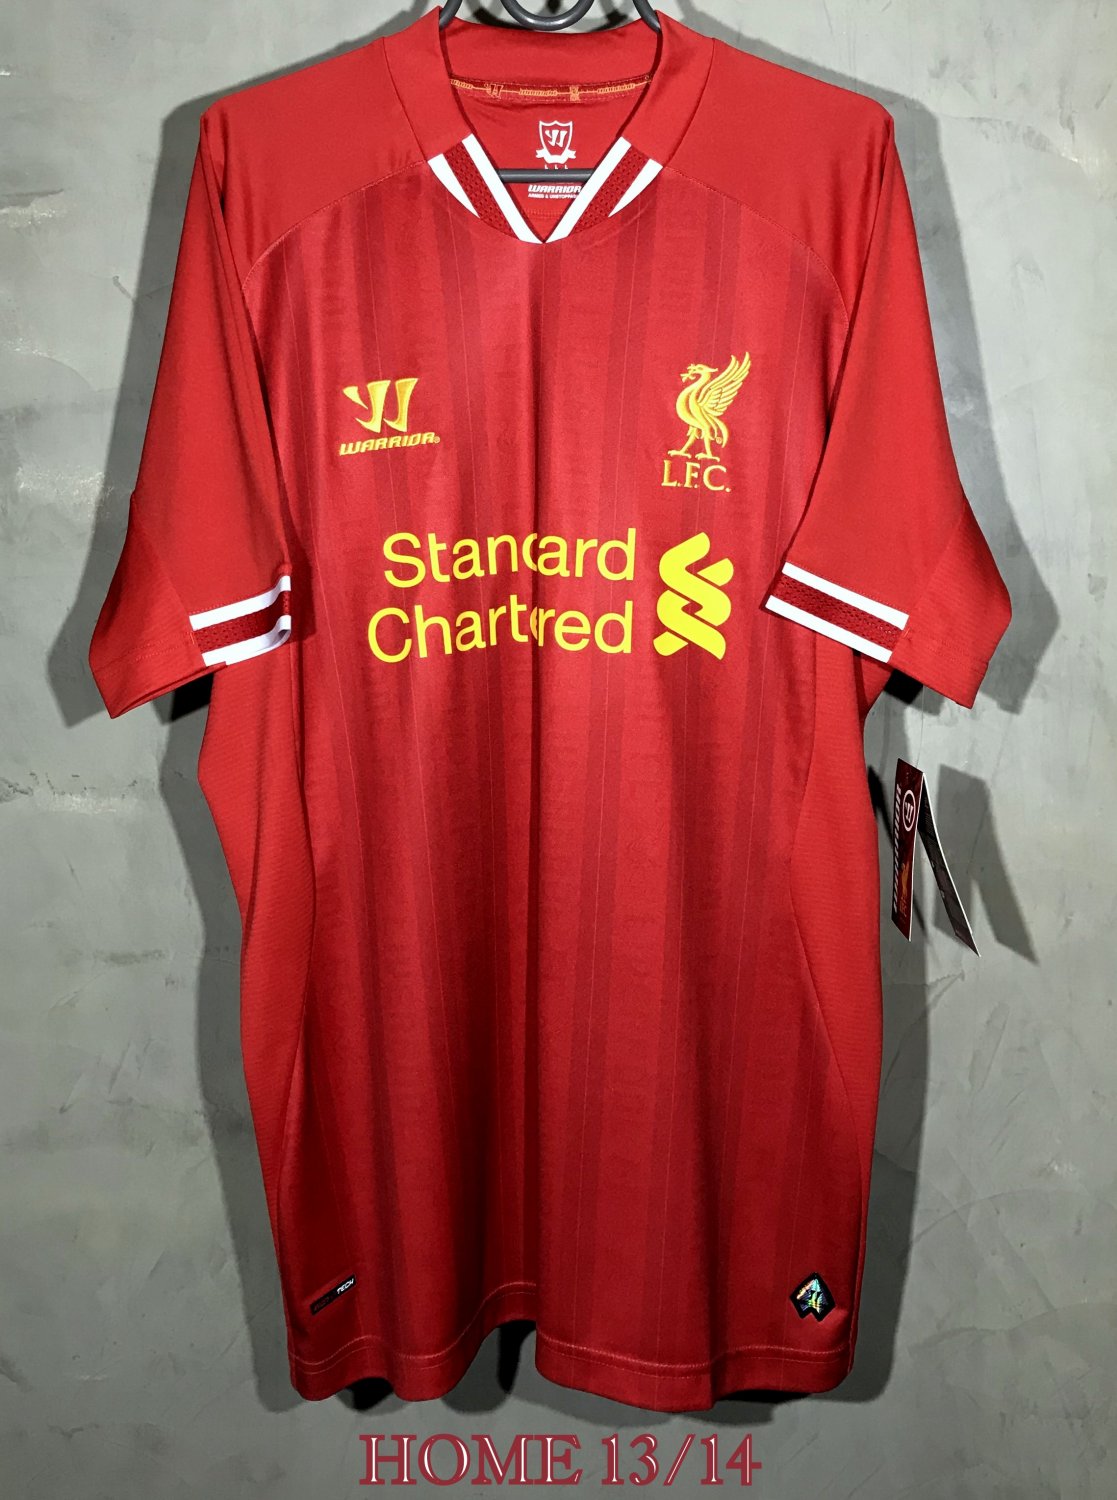 Liverpool Home football shirt 2013 - 2014. Sponsored by Standard Chartered